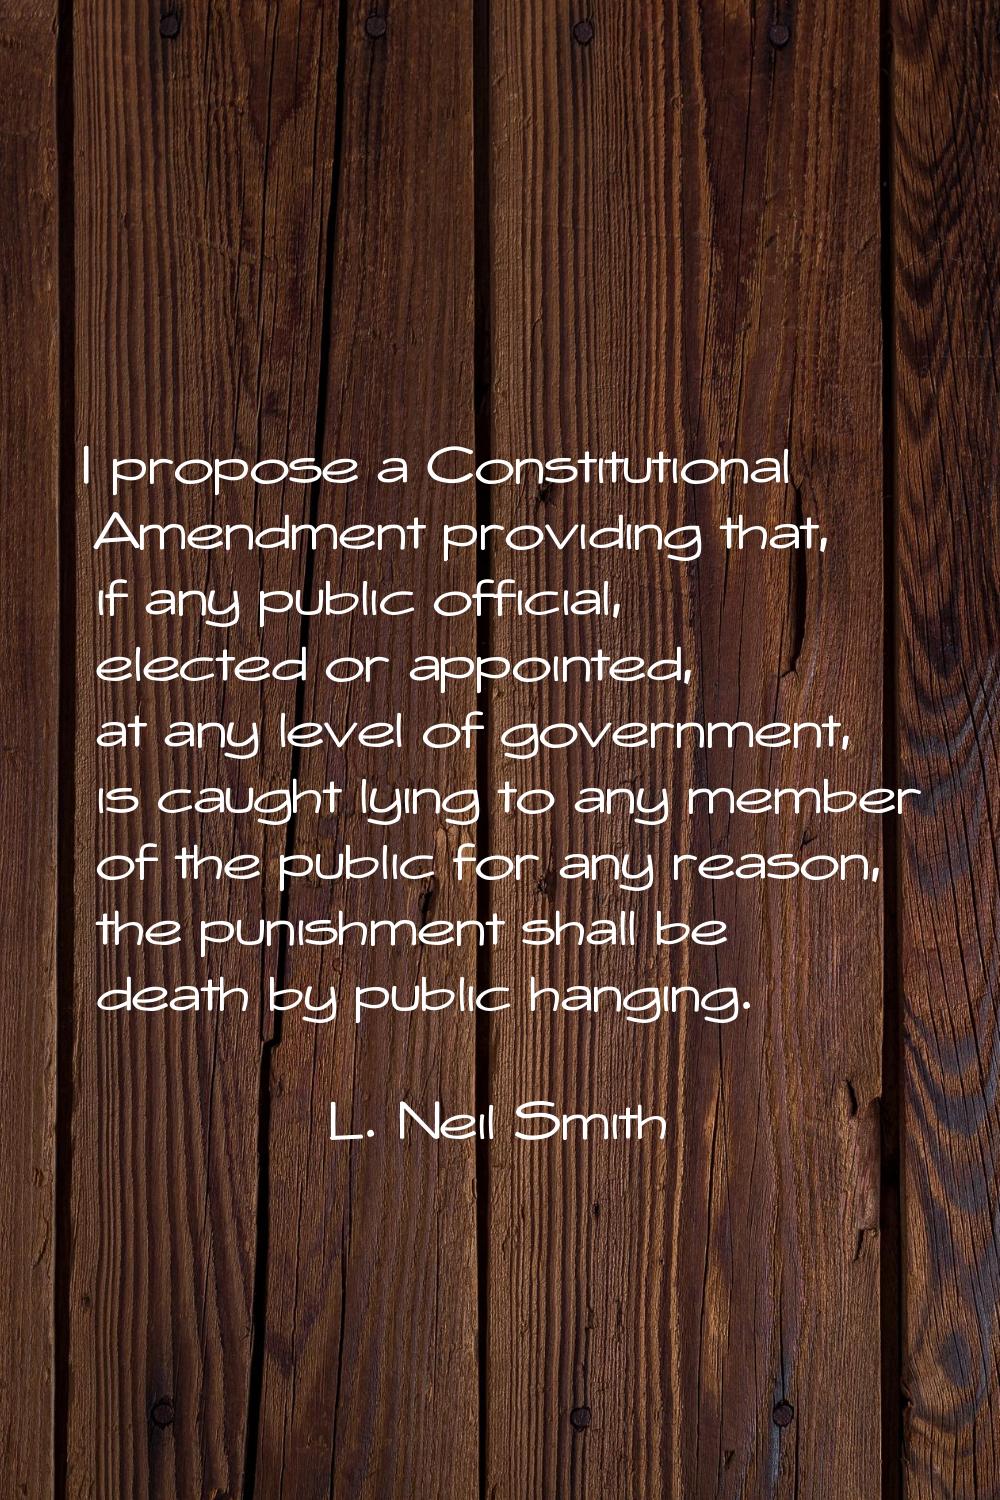 I propose a Constitutional Amendment providing that, if any public official, elected or appointed, 